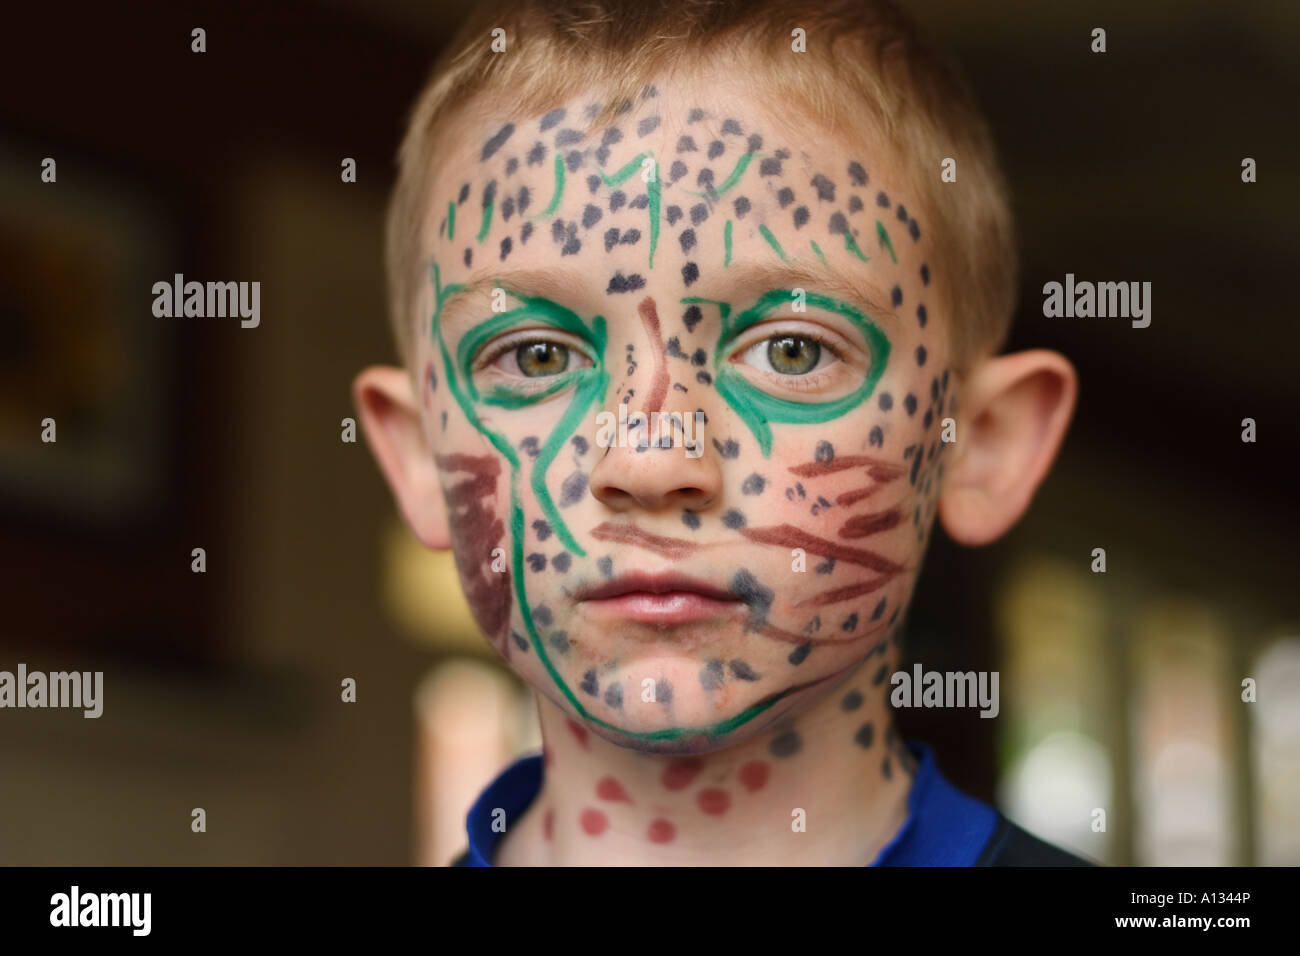 A boy with marker on his face Stock Photo - Alamy